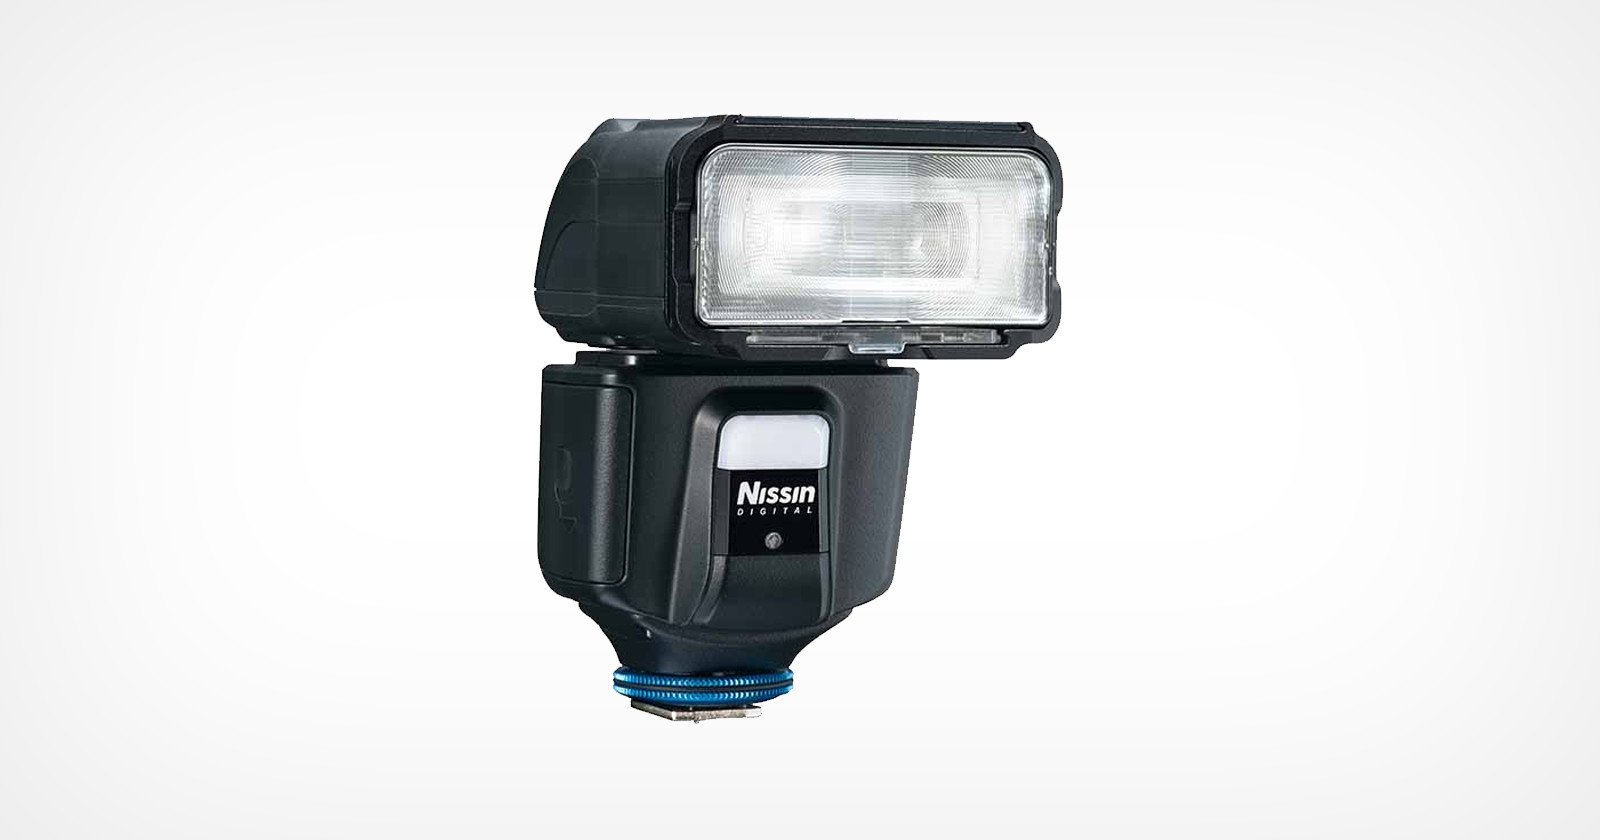 Nissins New Nikon Strobe Shows High Flash Prices Are Here to Stay